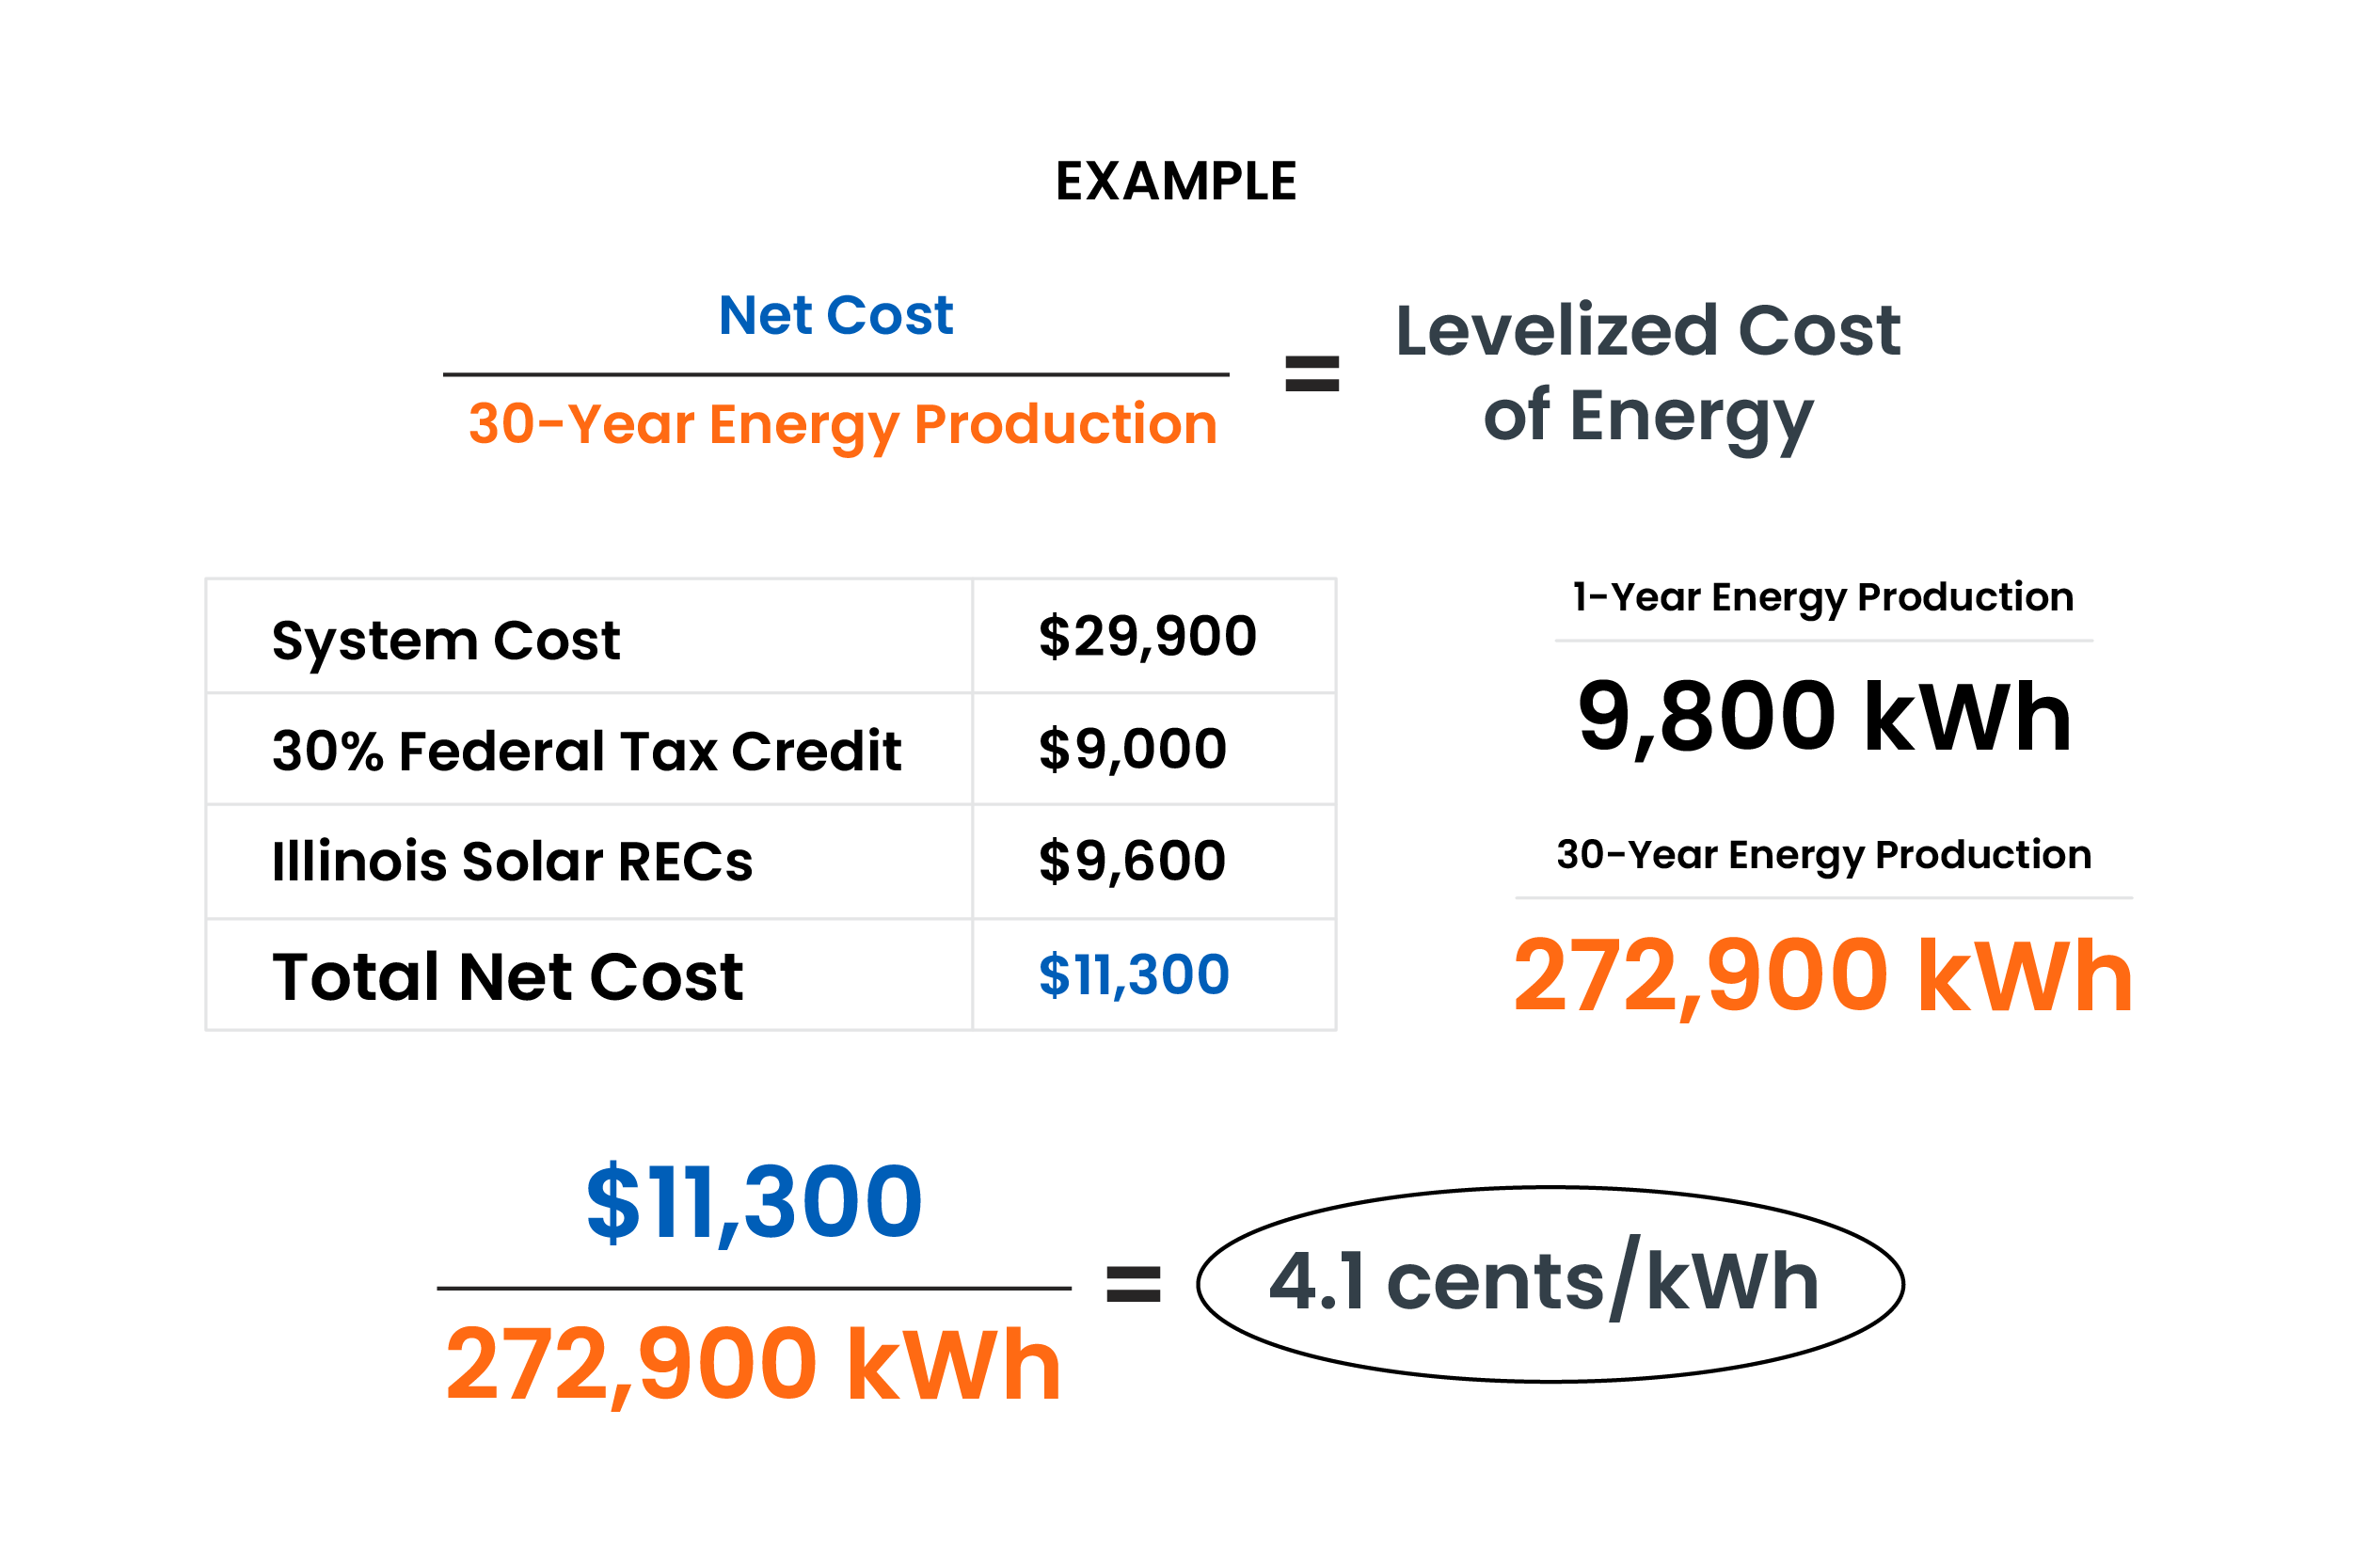 Solar Reduces Your Levelized Cost of Energy